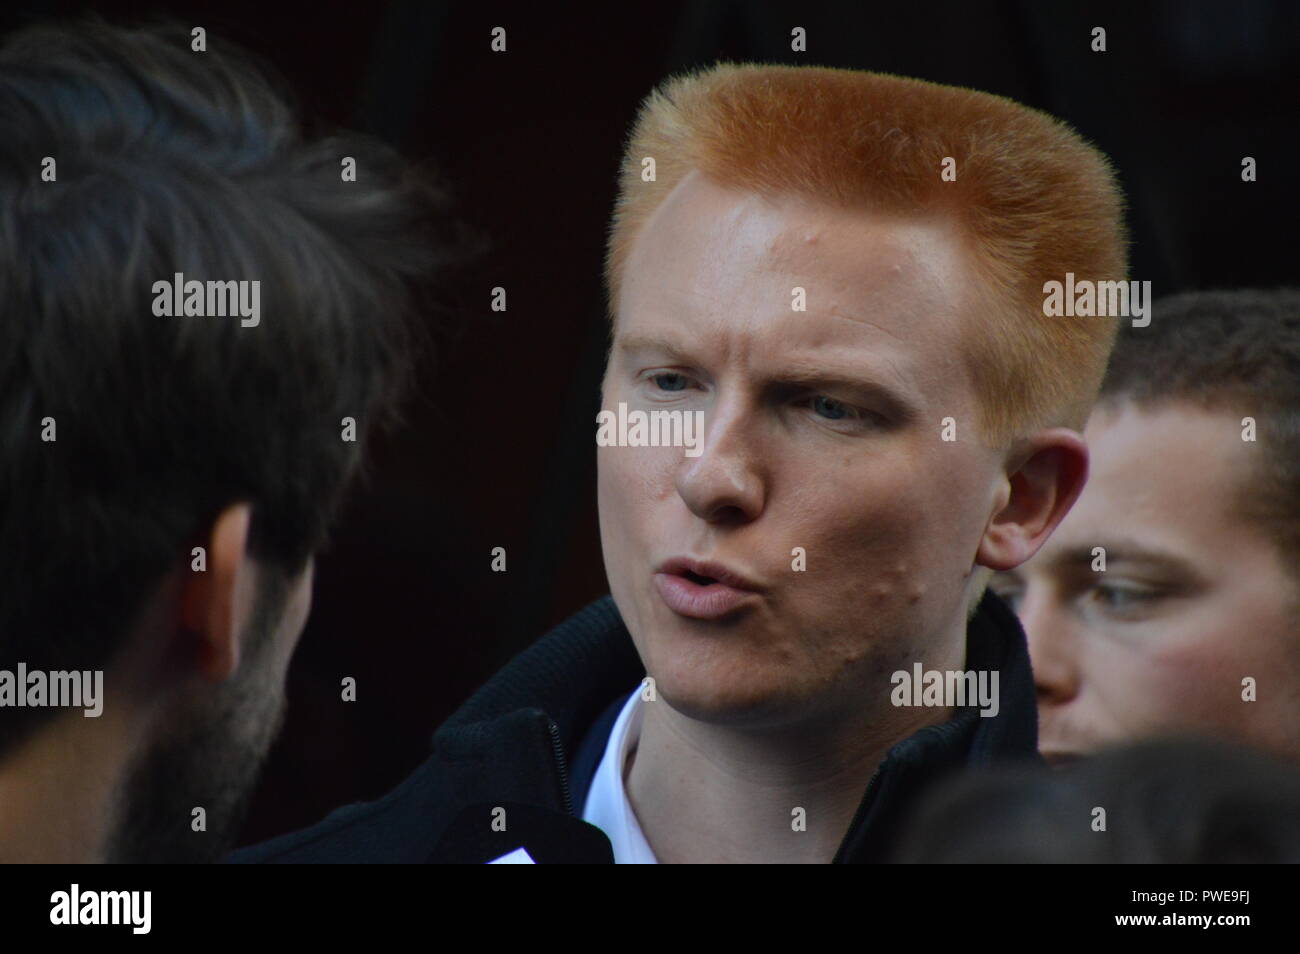 Paris, France. 16th October, 2018. Adrien QUATENNENS (with brushed redhair): French deputy member of LFI. Police search at the french politic party LFI (La France Insoumise : The Unsubmissive France) headquarter. Support is arriving for the founder Jean-Luc Melenchon. 16 october 2018. Paris, France, rue de Dunkerque.  ALPHACIT NEWIM / Alamy Live News Stock Photo